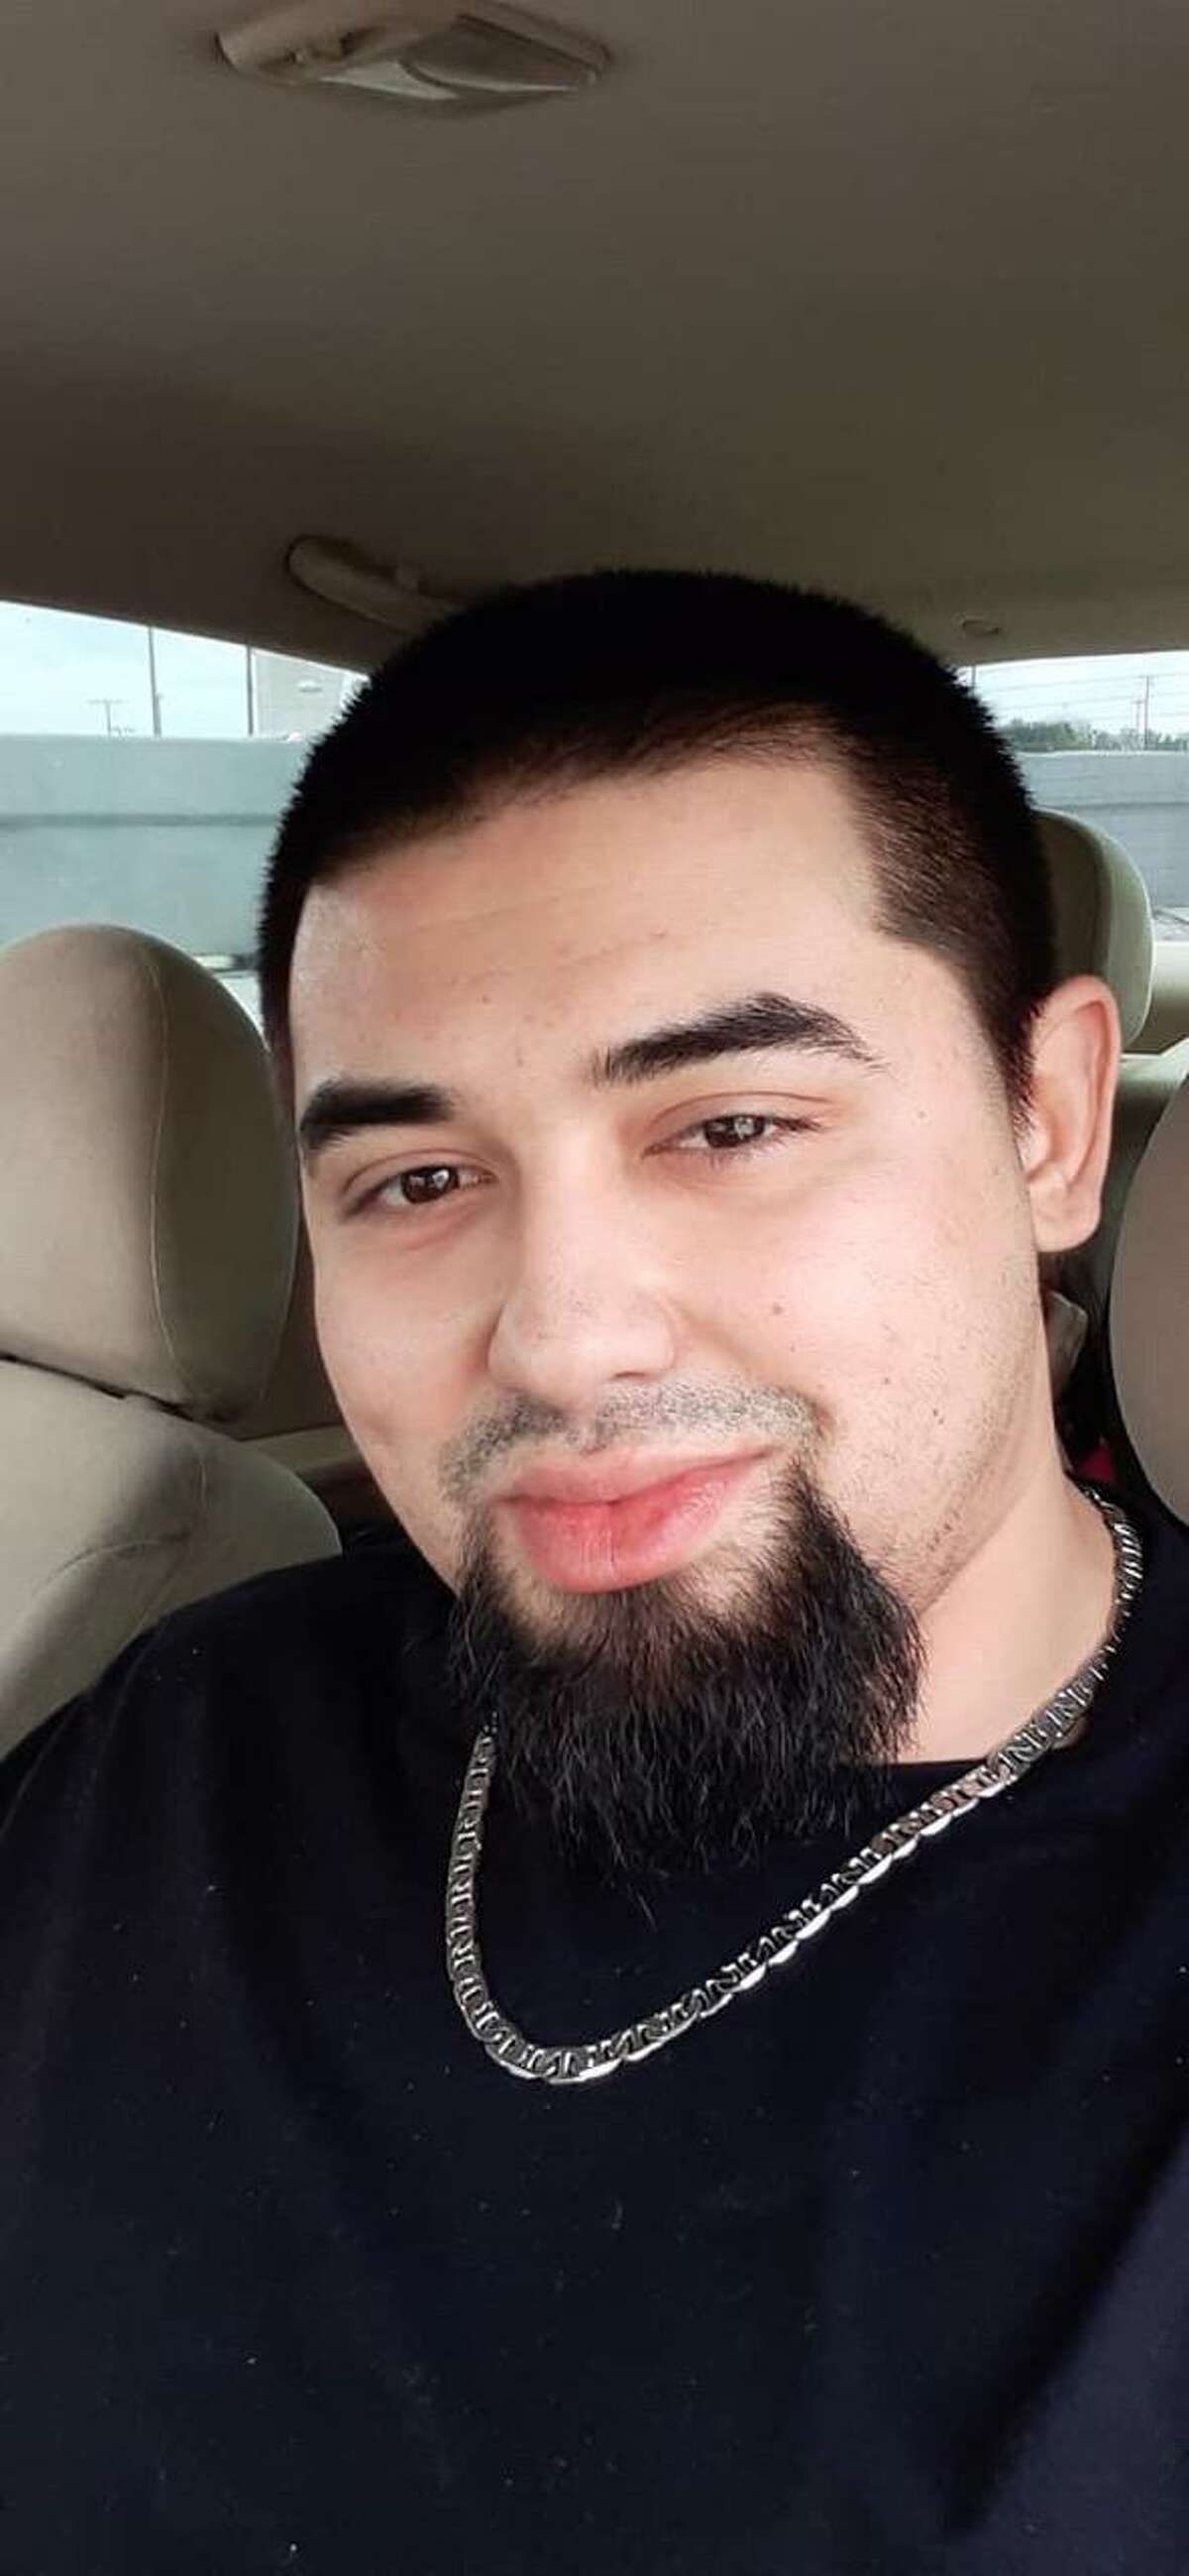 Nicolas Chavez was shot and killed by police April 21, 2020 in the 800 block of Gazin, where police said he threatened officers and neighbors with a weapon. Four of five city police officers who fired shots were dismissed September 10, 2020 for their roles in the shooting death.